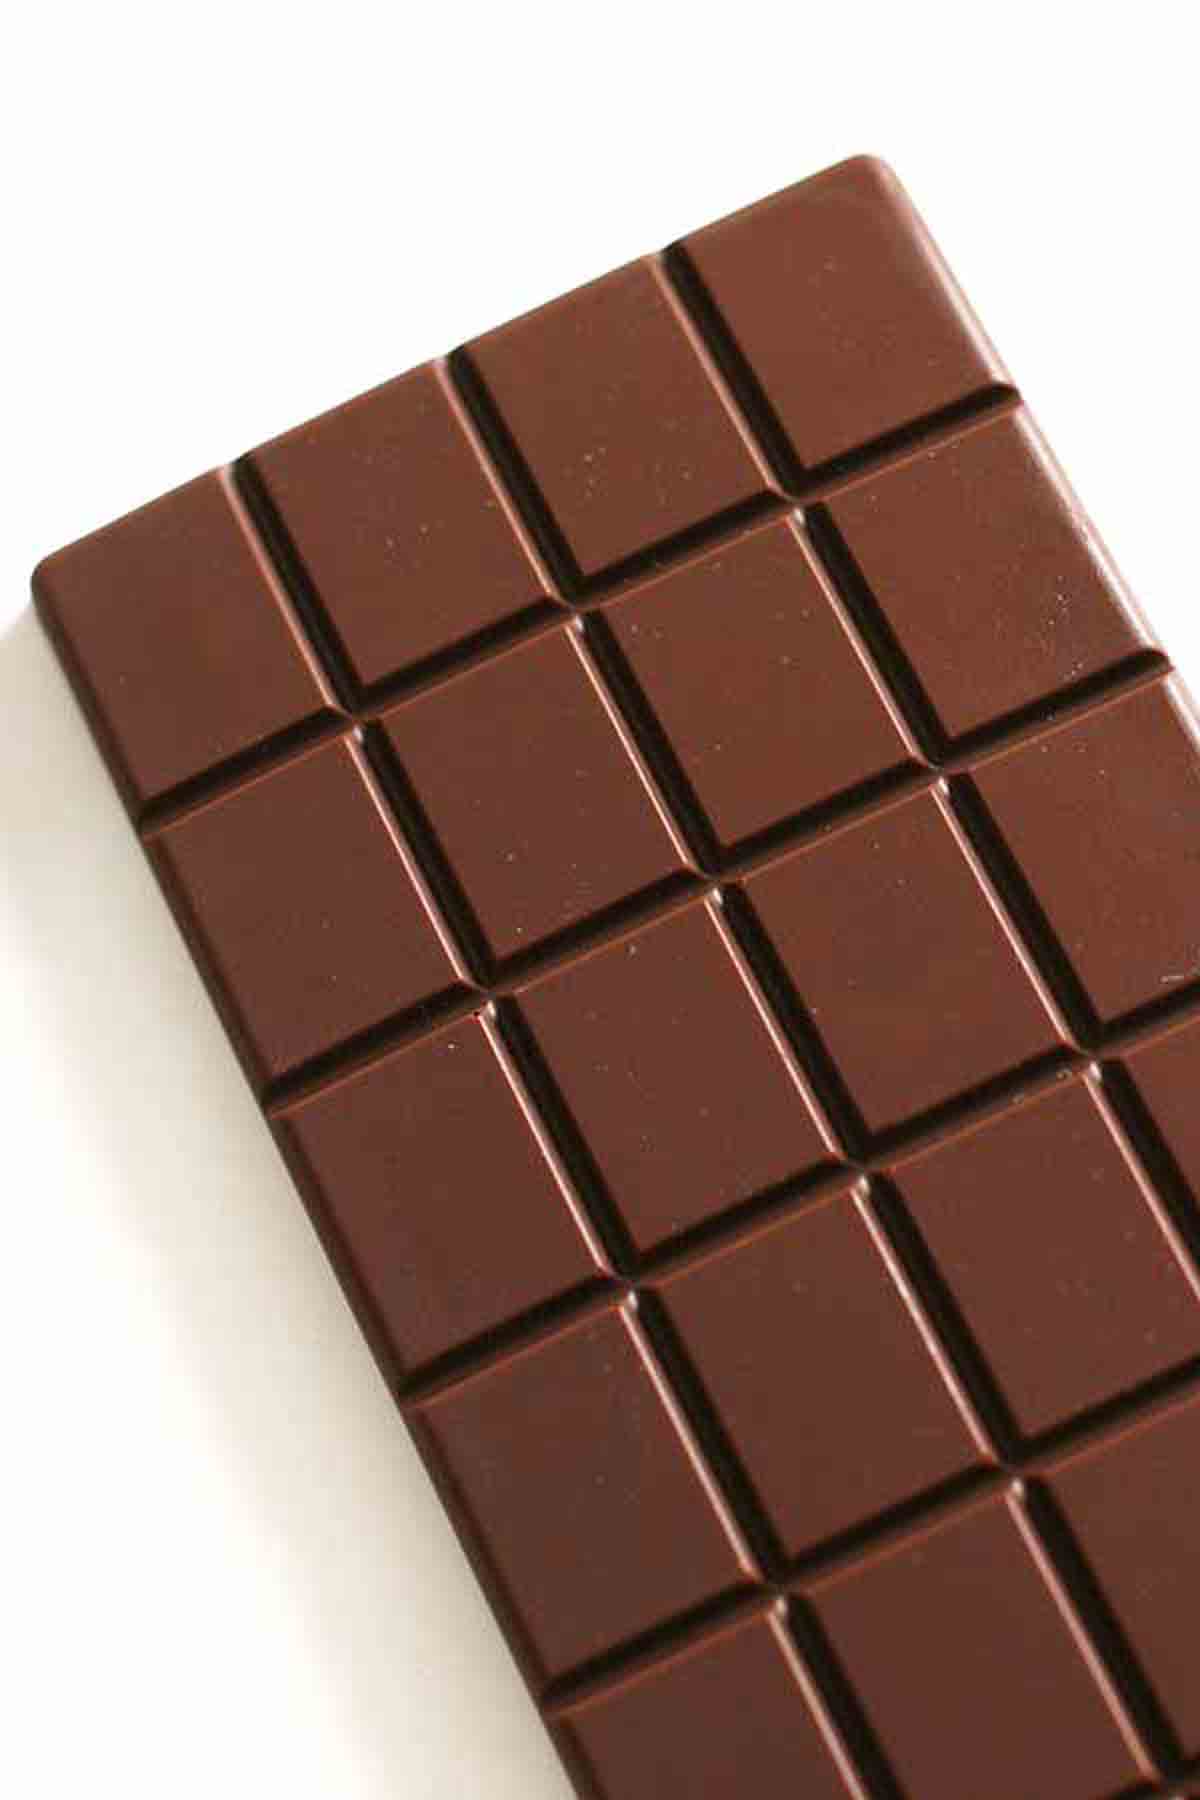 Dairy-free Chocolate Bar Made With Cocoa Powder